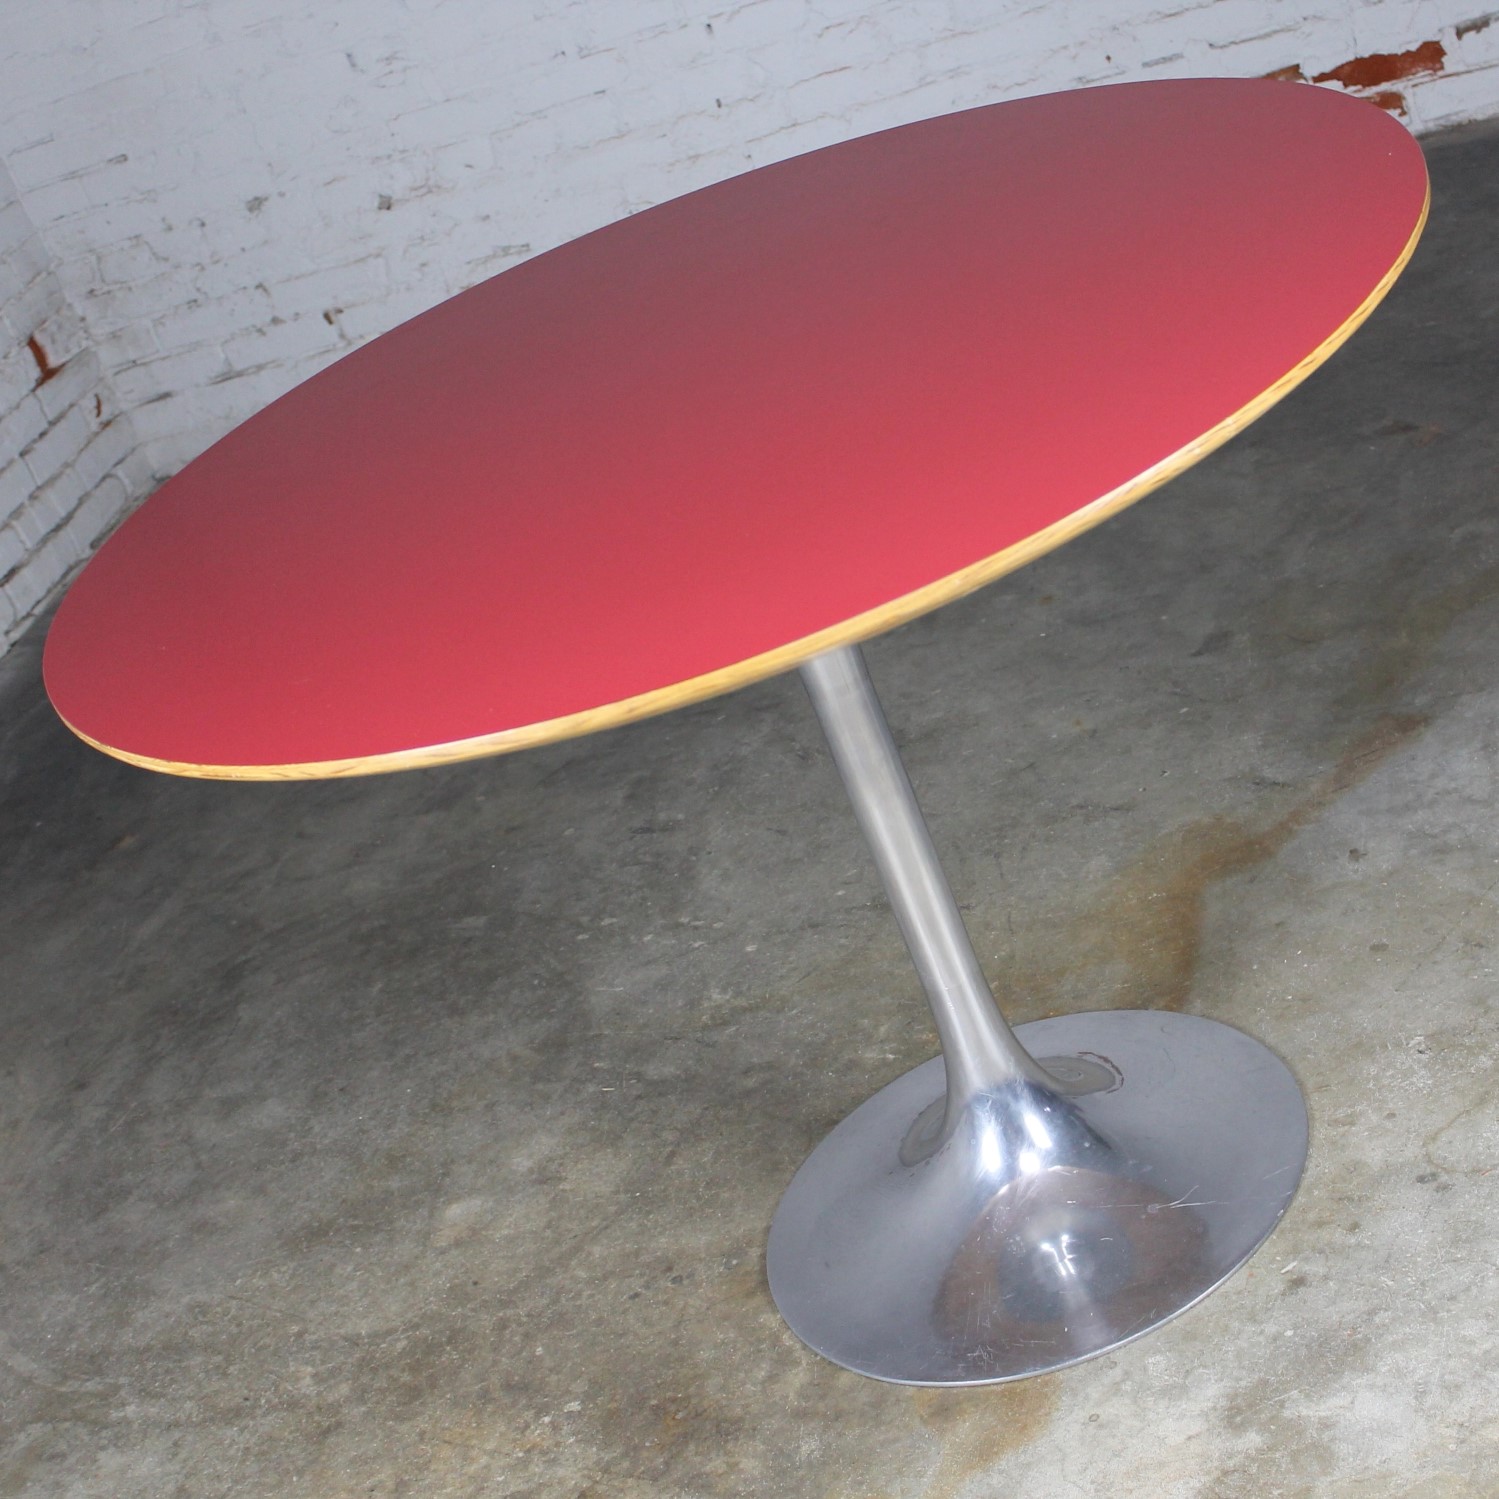 Vintage Saarinen Style Polished Aluminum Tulip Base Dining Table w/Red Laminate Top